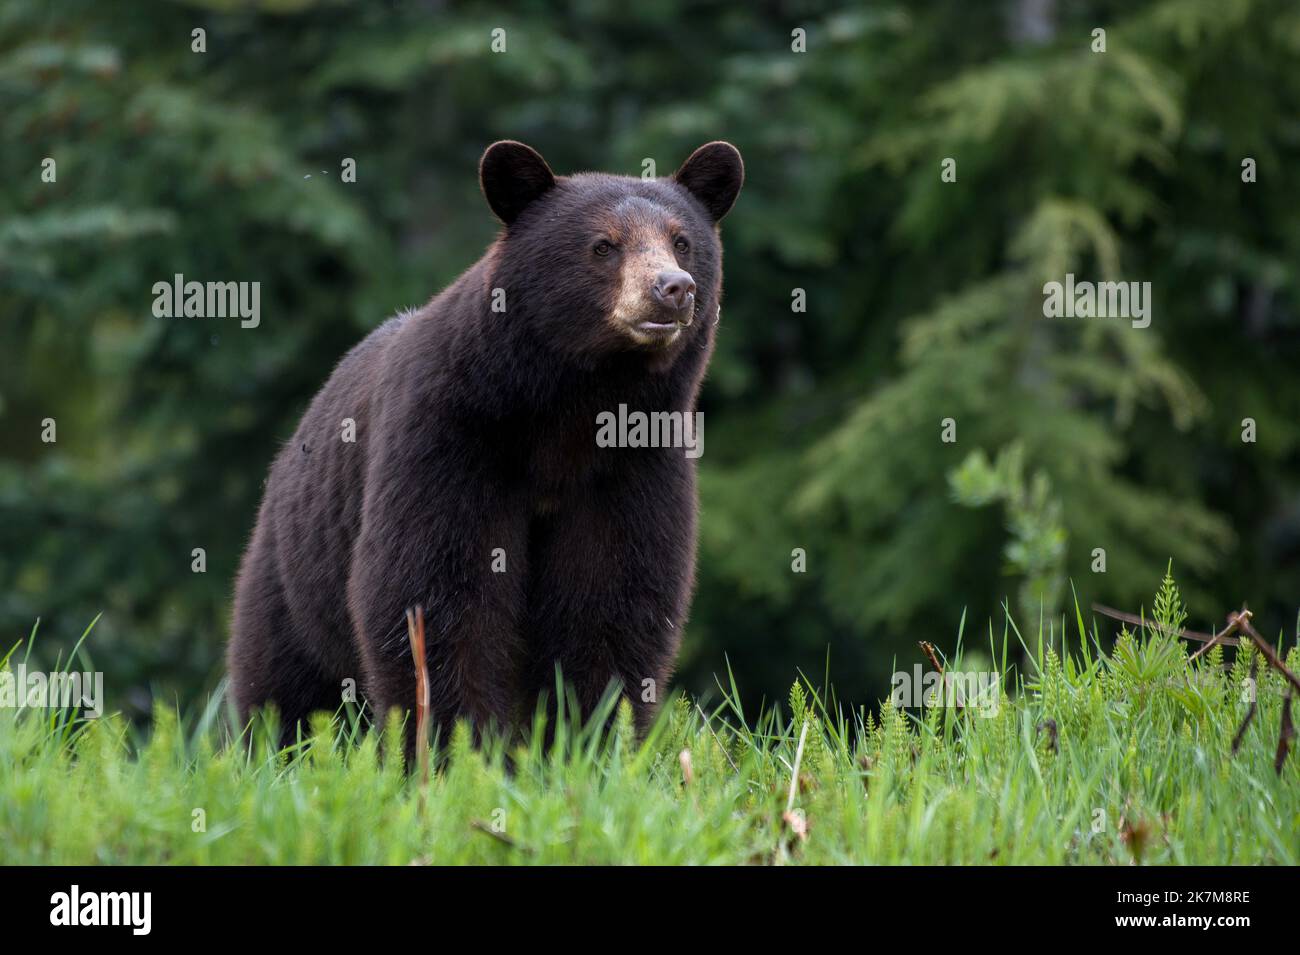 The bear starts pulling funny faces. Vancouver, Canada: THESE COMICAL photos show a black bear blowing a powerful raspberry. One hilarious image shows Stock Photo